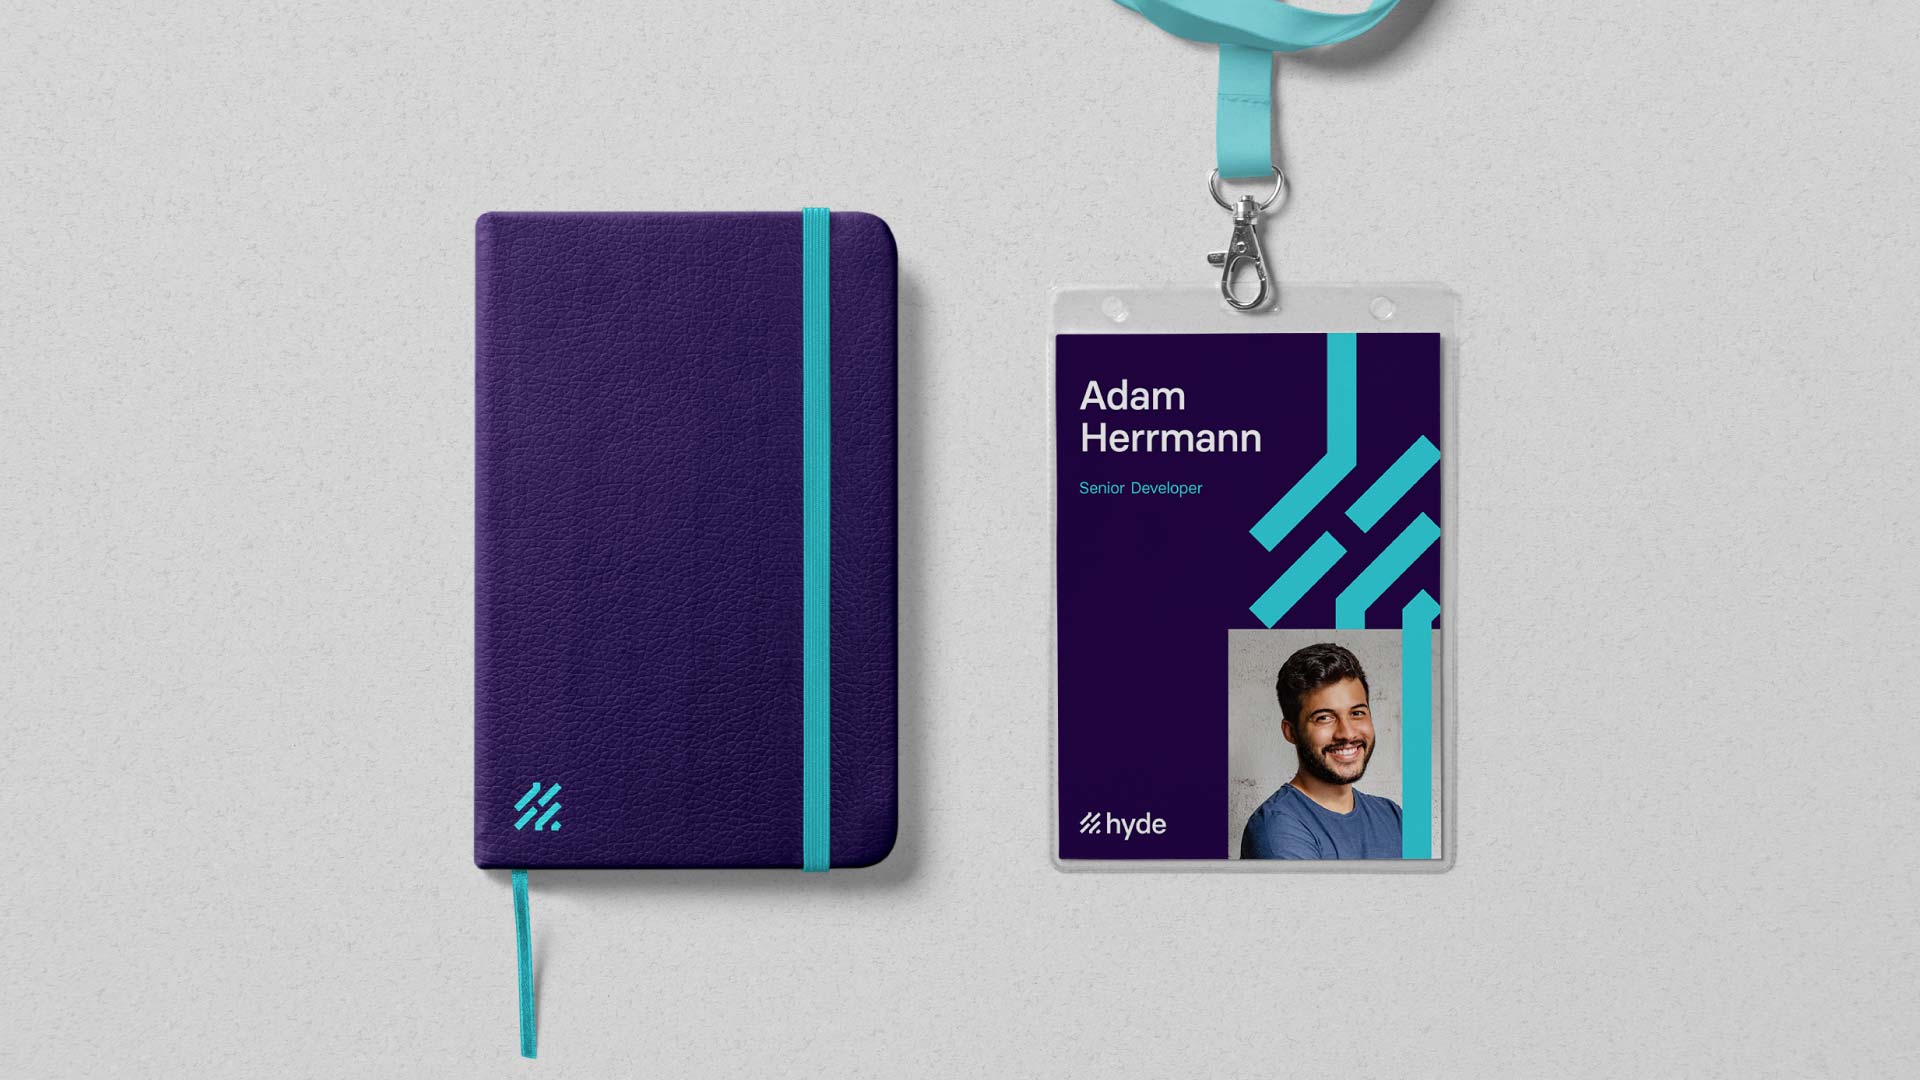 Hyde branded stationery. A5 notebook using Hyde colour palette and lanyard design for in-person events.